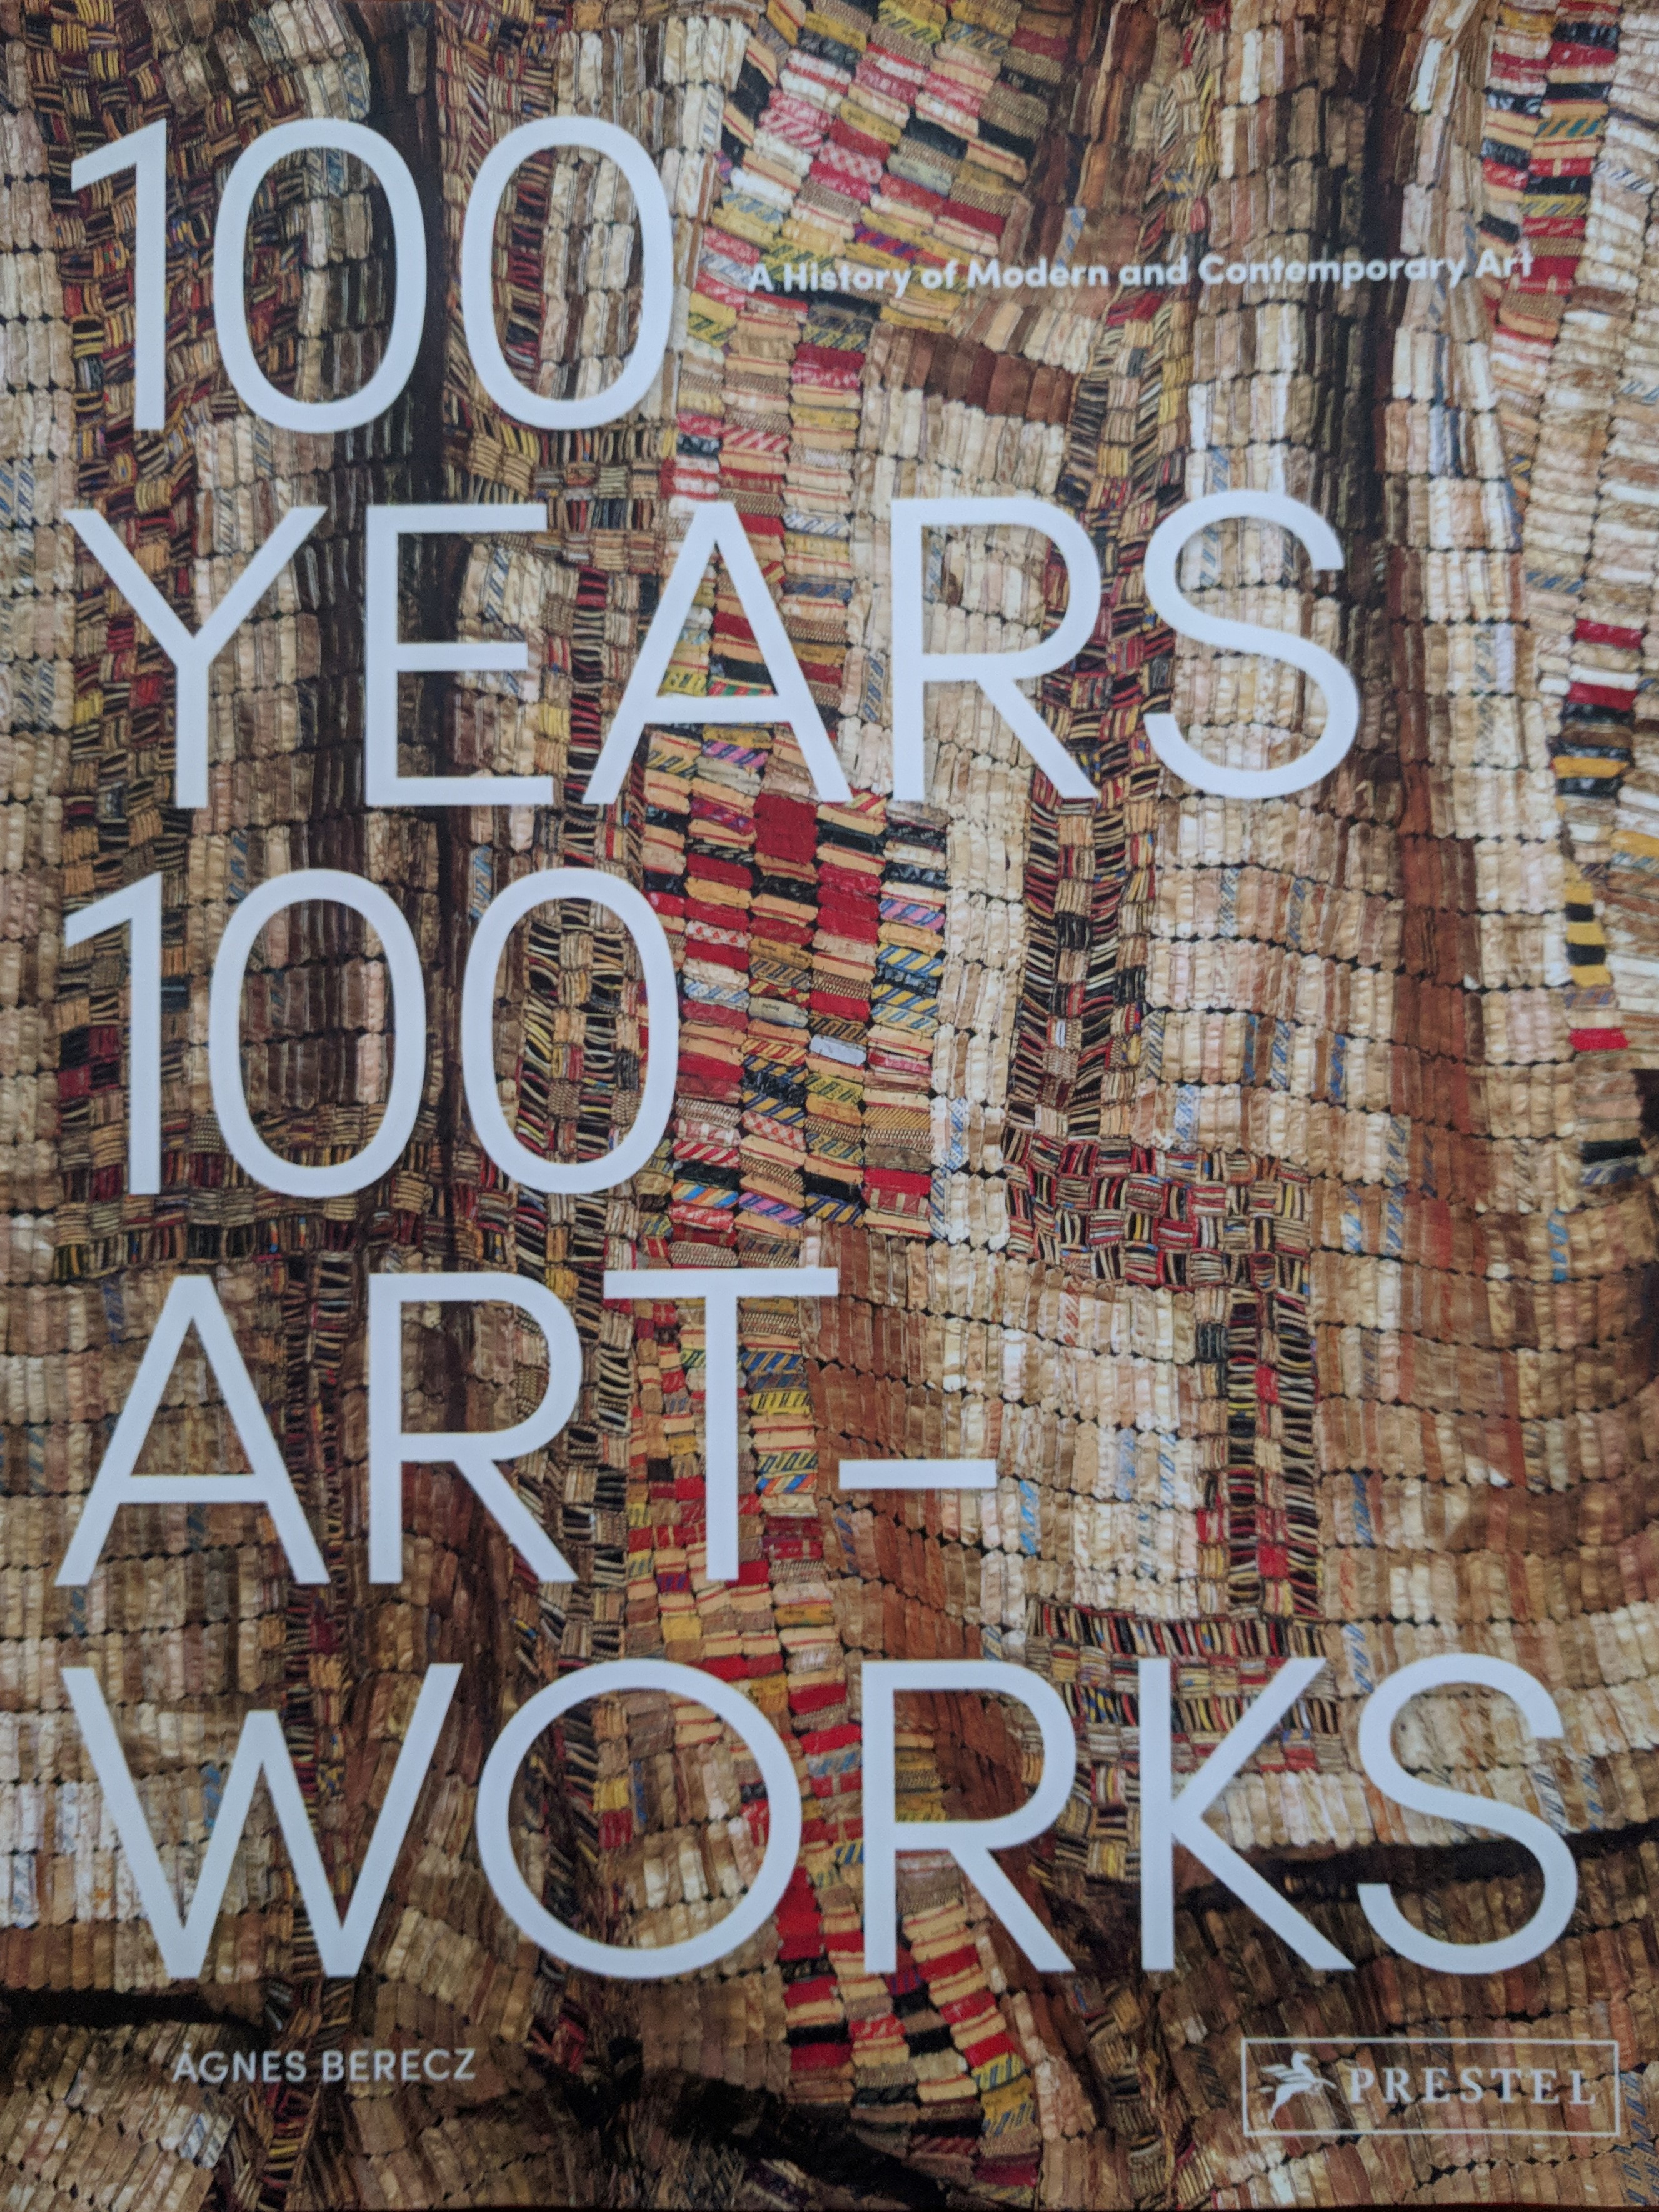 100 Years 100 Artworks: A History of Modern and Contemporary Art 